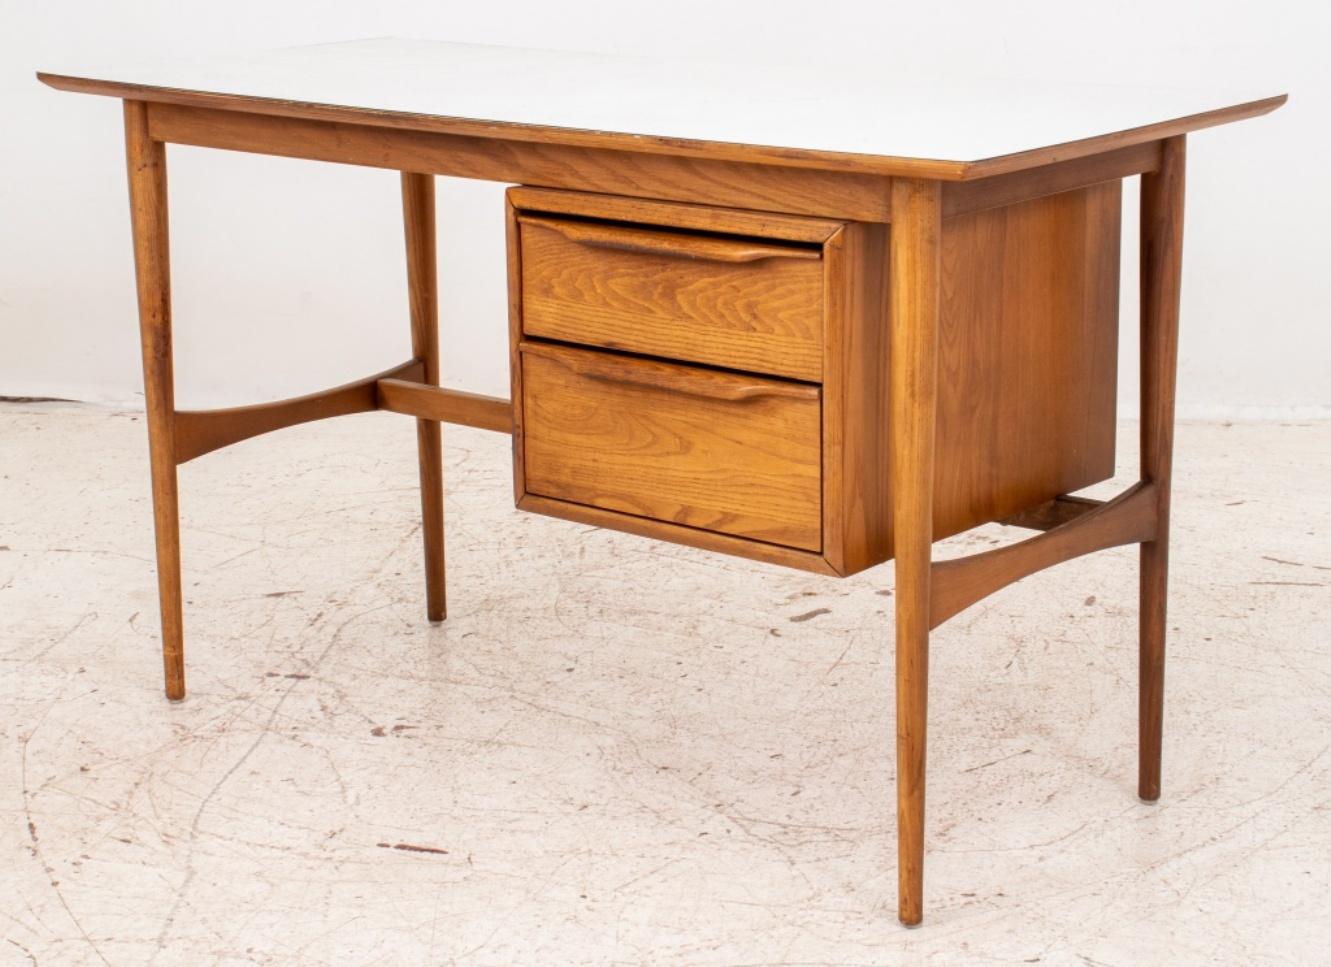 Heywood Wakefield Danish modern-style walnut small desk, circa 1960s with rectangular white formica top above two drawers to right. The four tapered legs are conjoined by stretchers. Manufacturers' branded mark is located in the top interior drawer.